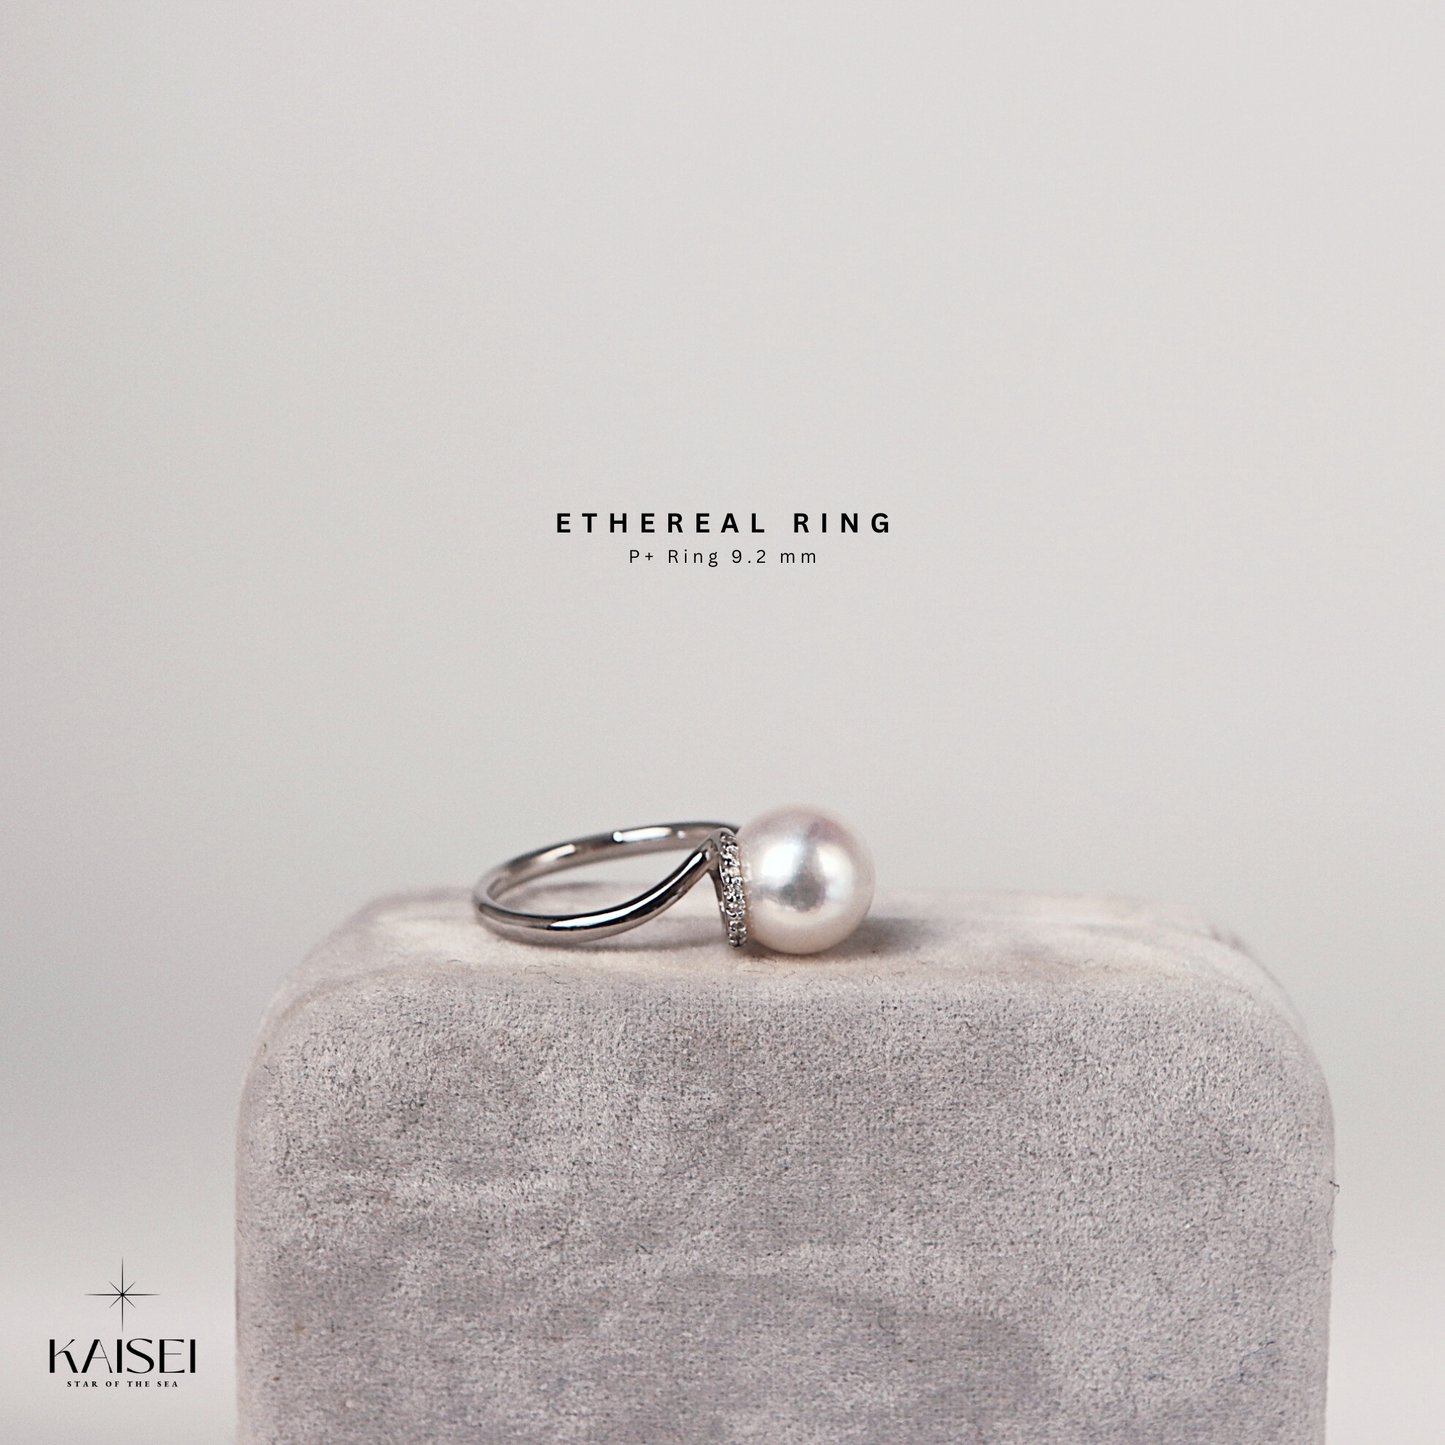 Kaisei Pearl - Ethereal Ring Japanese Akoya Pearl Ring Jewelry Diamond Silver